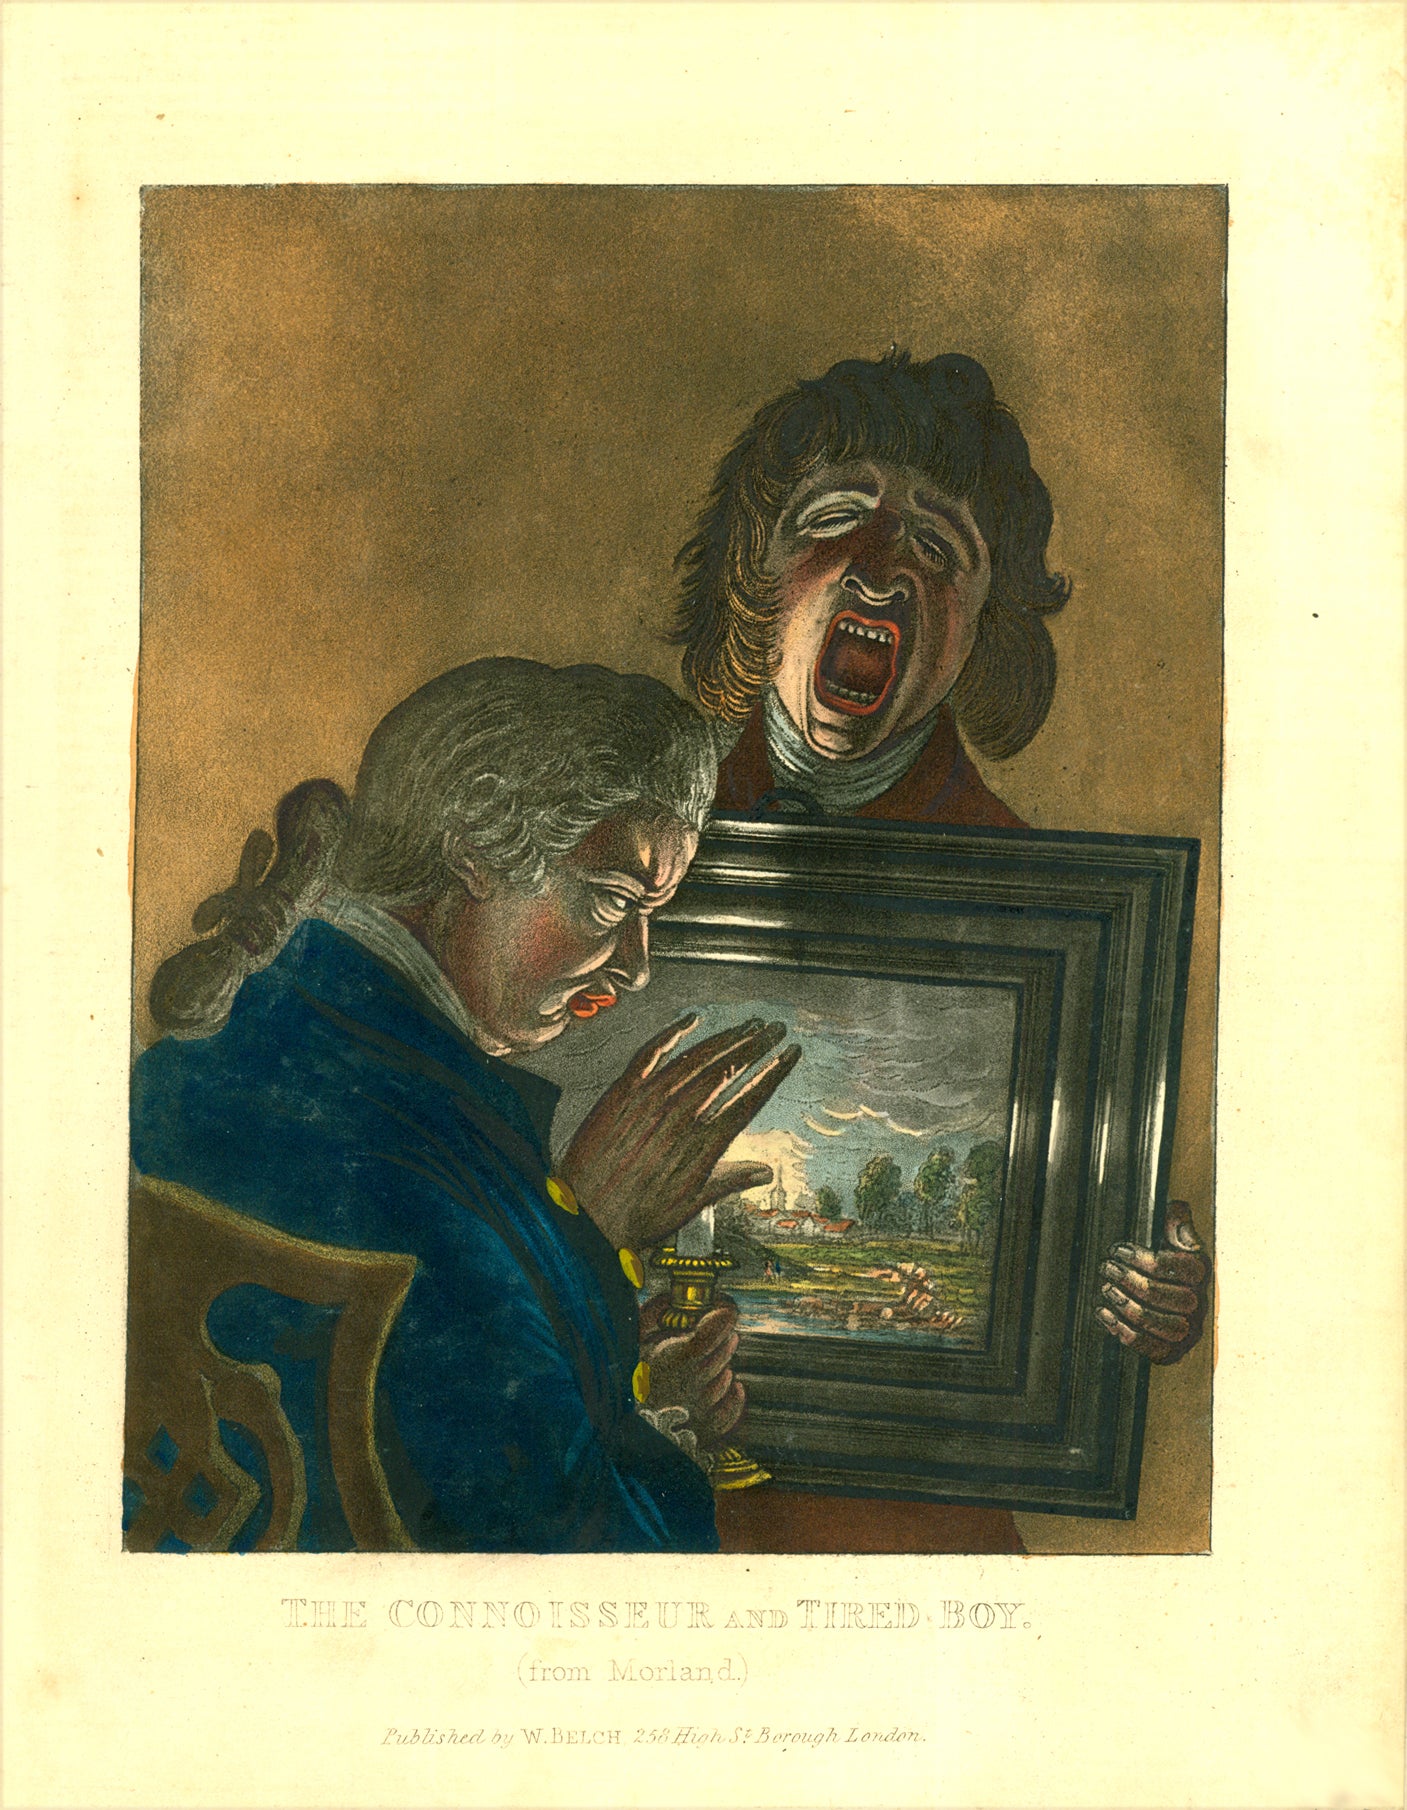 "The Connoisseur and Tired Boy"  Aquatinta after the painting by Henry Morland (1716-1797) - father of George Morland and the mezzotint by Philip Dawe, which he produced in 1773  Printed in colour  Published by William Belch.  London, ca. 1820  This splendid caricature of an old critical art collector inspecting scrutinizingly a painting held for him by a bored, yawning young man, probably the art dealer.